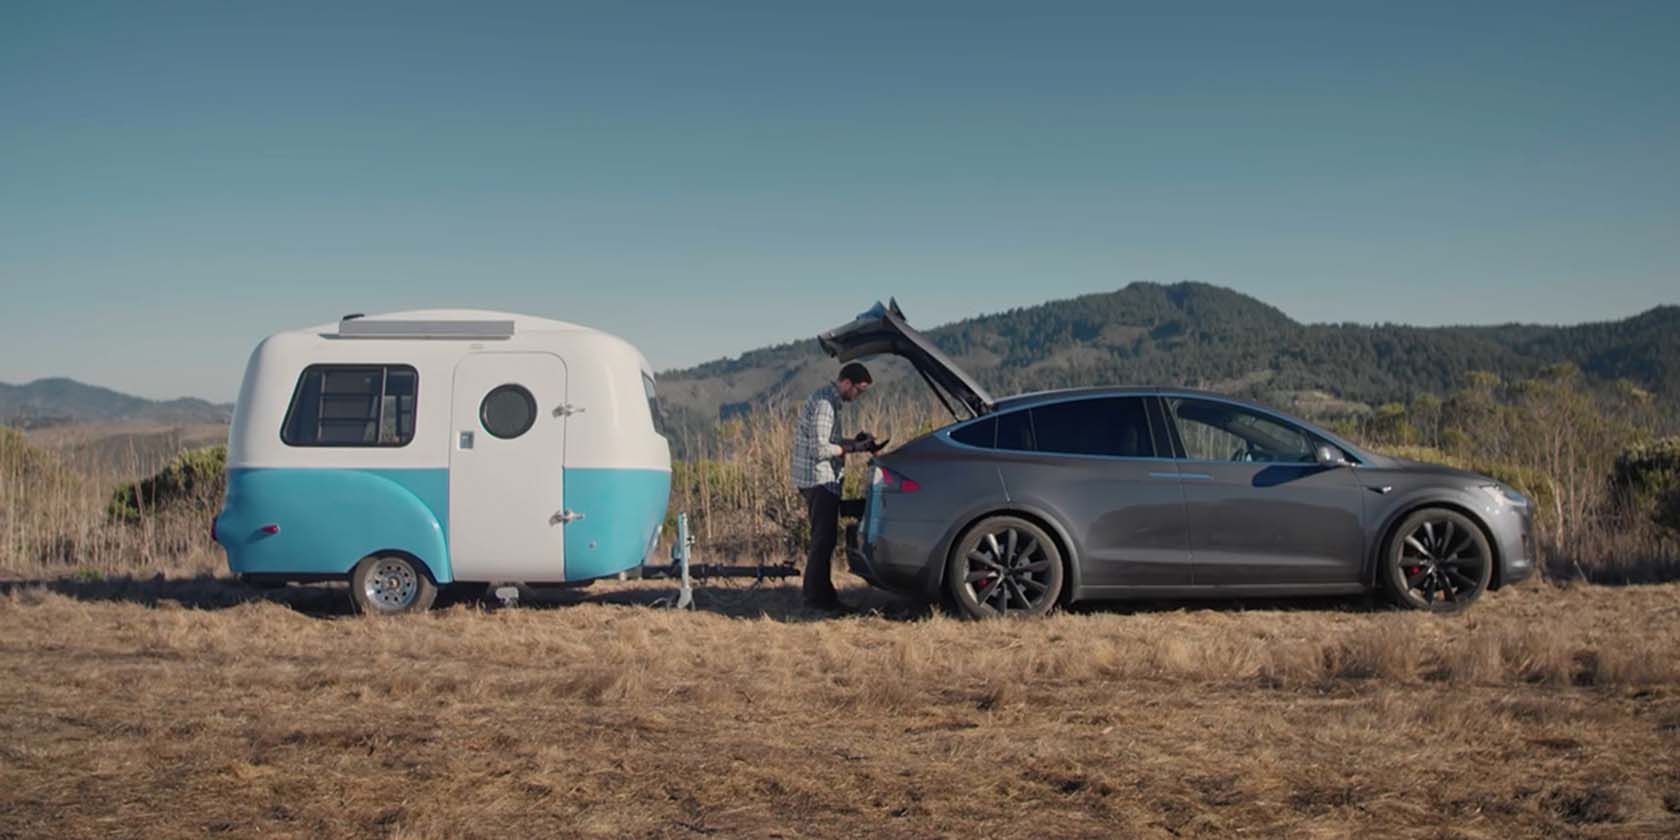 model x towing small camper image